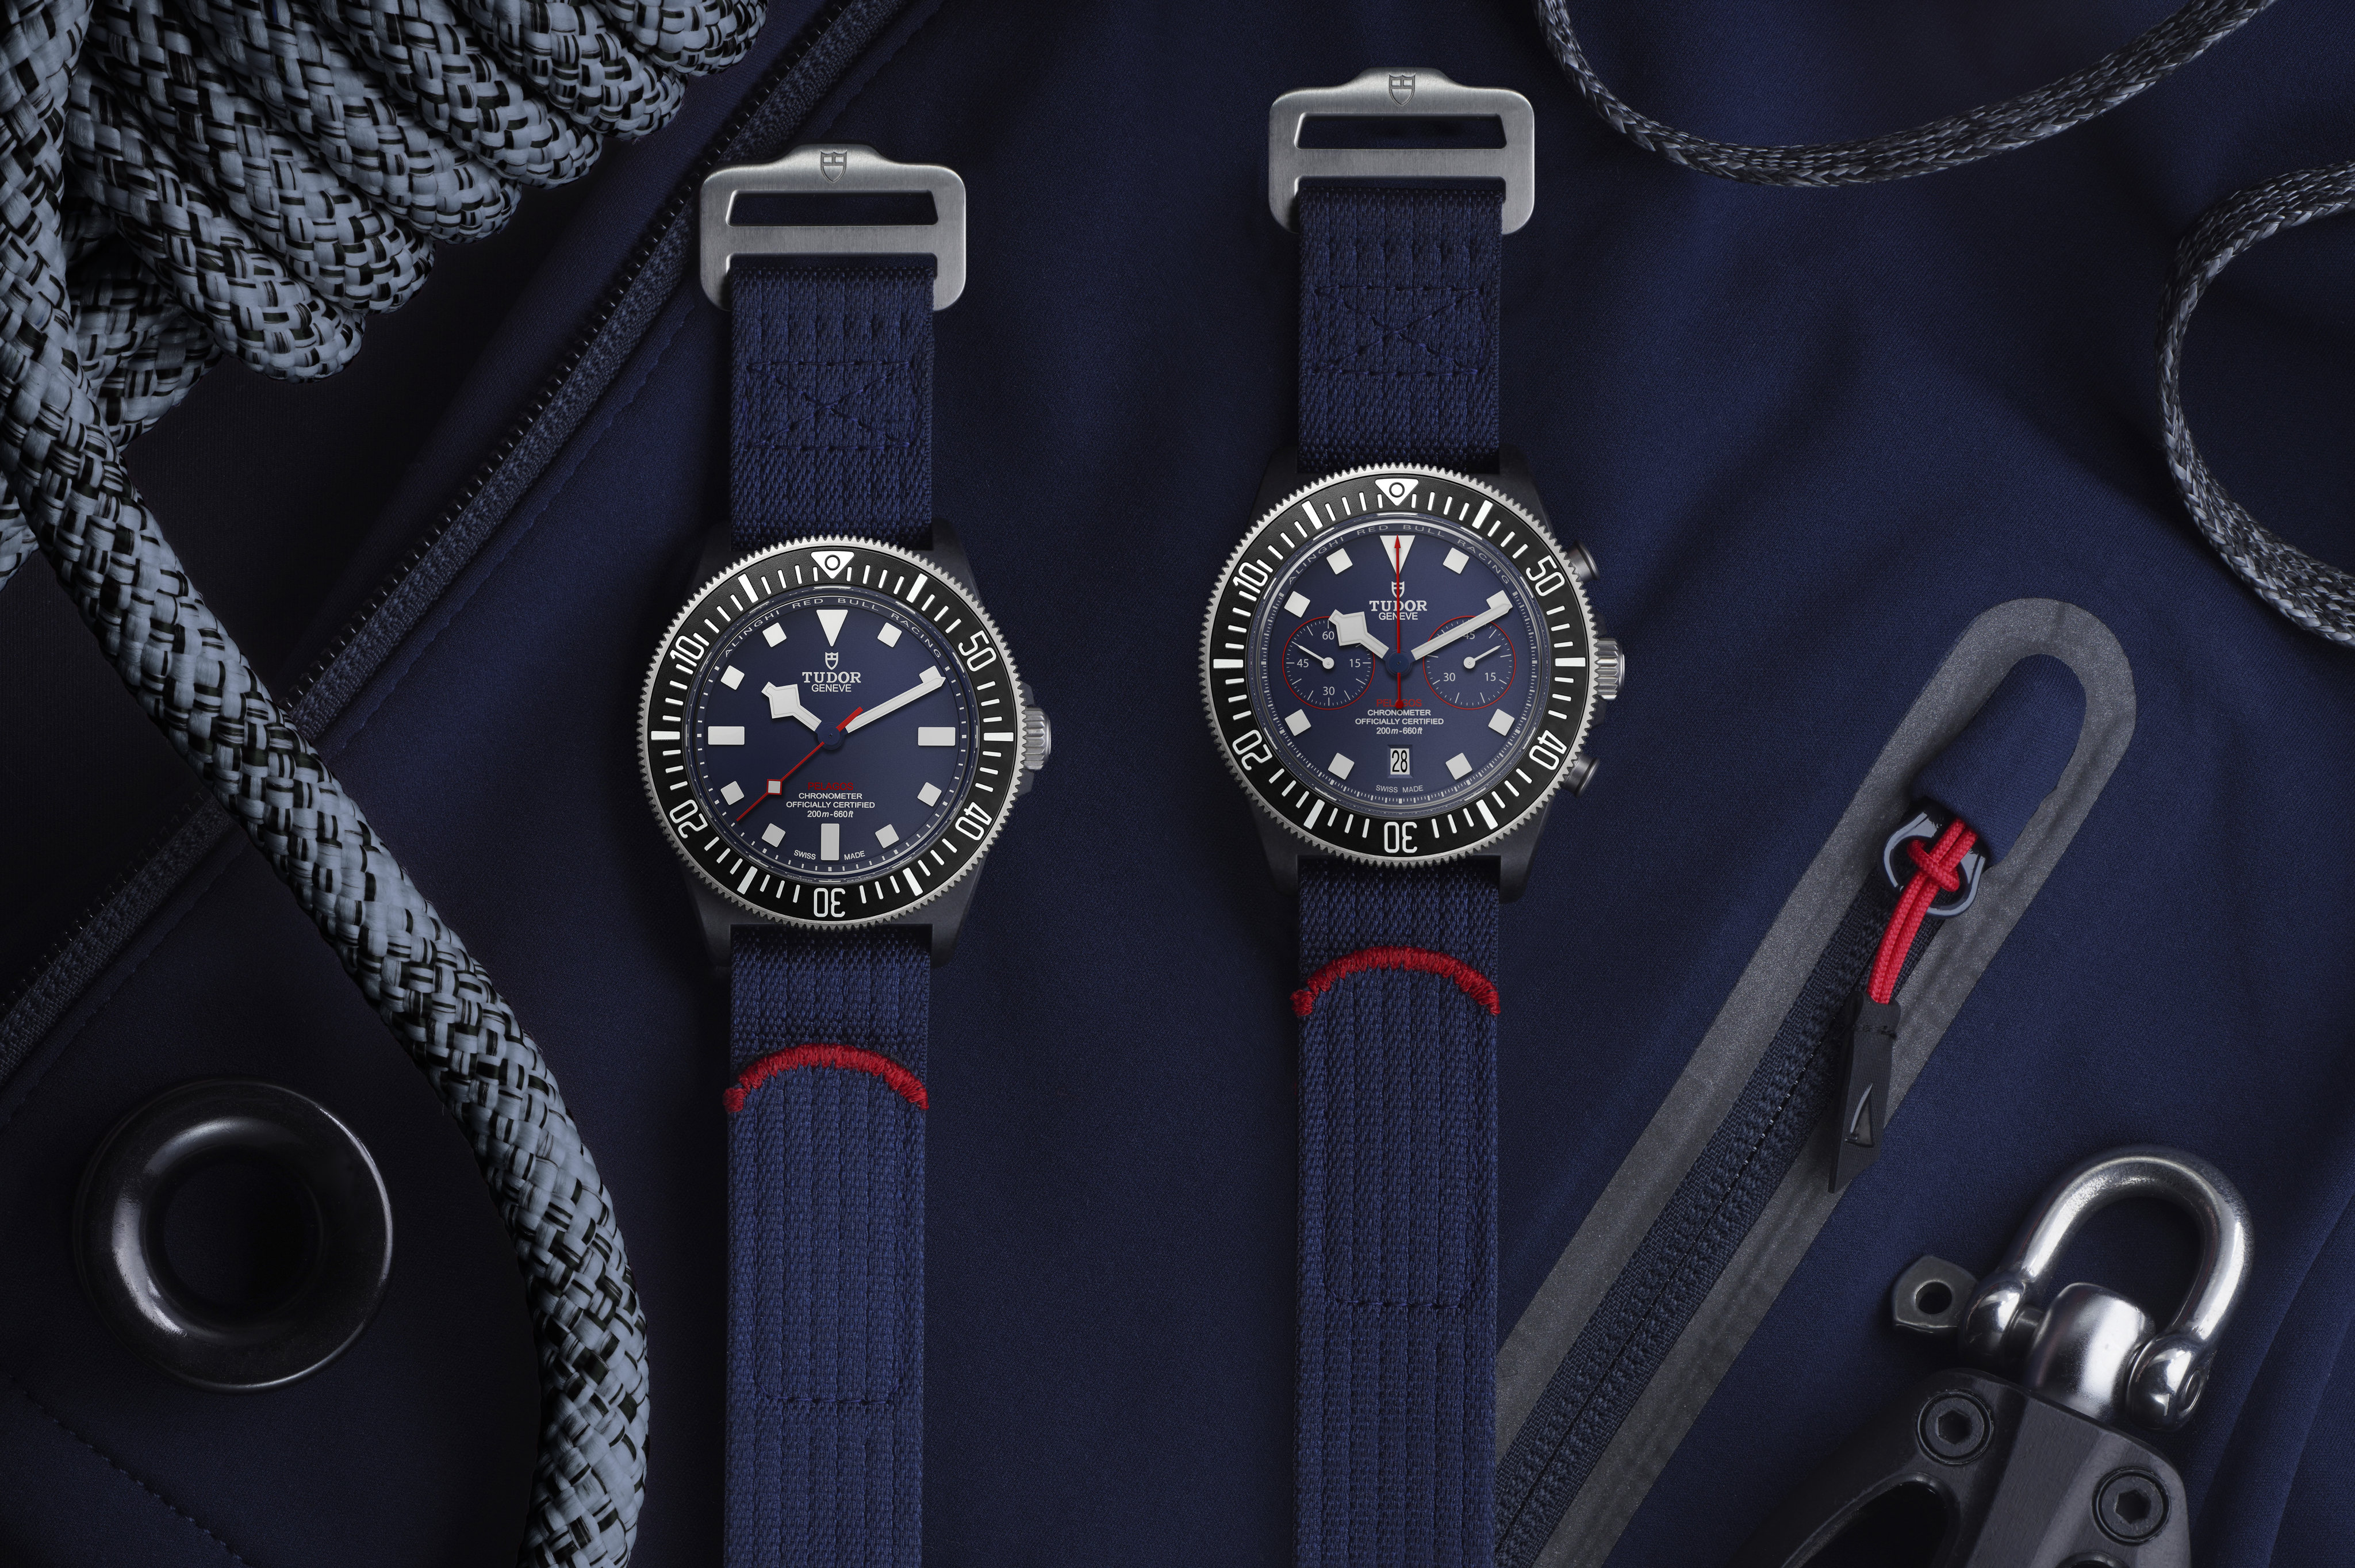 If you’re looking for a sporty watch that still looks chic paired with a sleek suit, look no further than the Pelagos FXD Alinghi Red Bull Racing Edition from Tudor. Photos: Handout